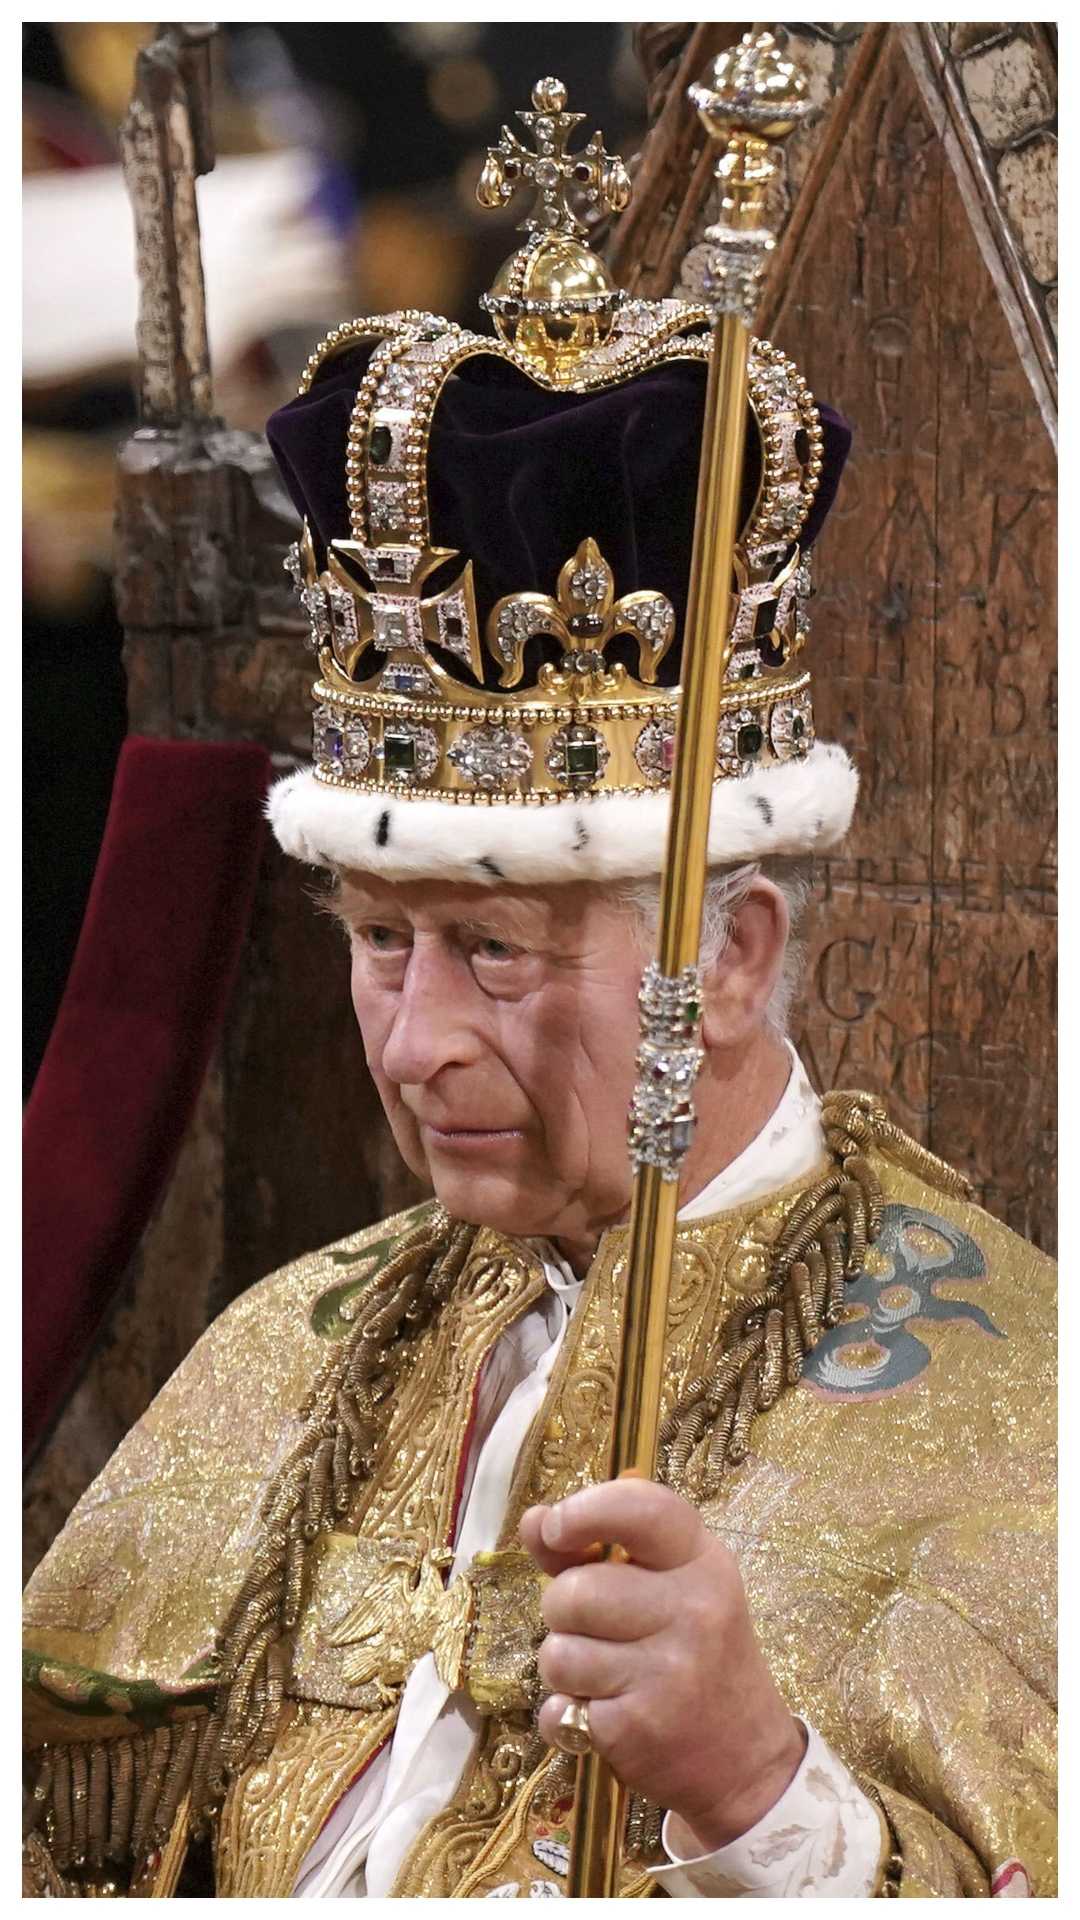 King Charles III crowned in ceremony blending history and change - CNA